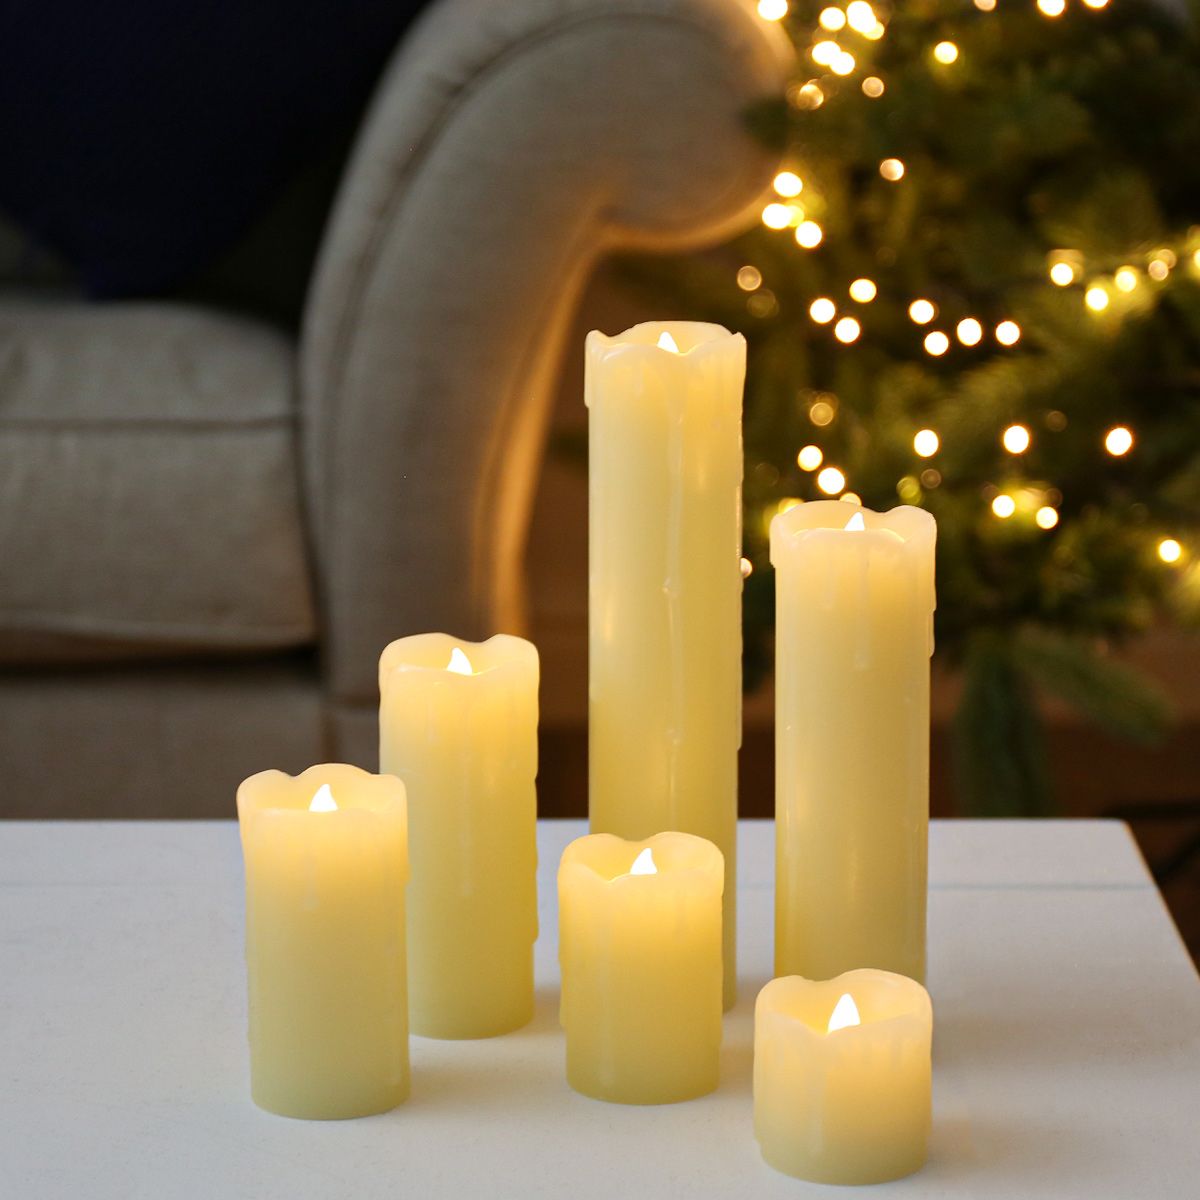 6 Battery Flickering Dripping Wax Pillar LED Candles image 8